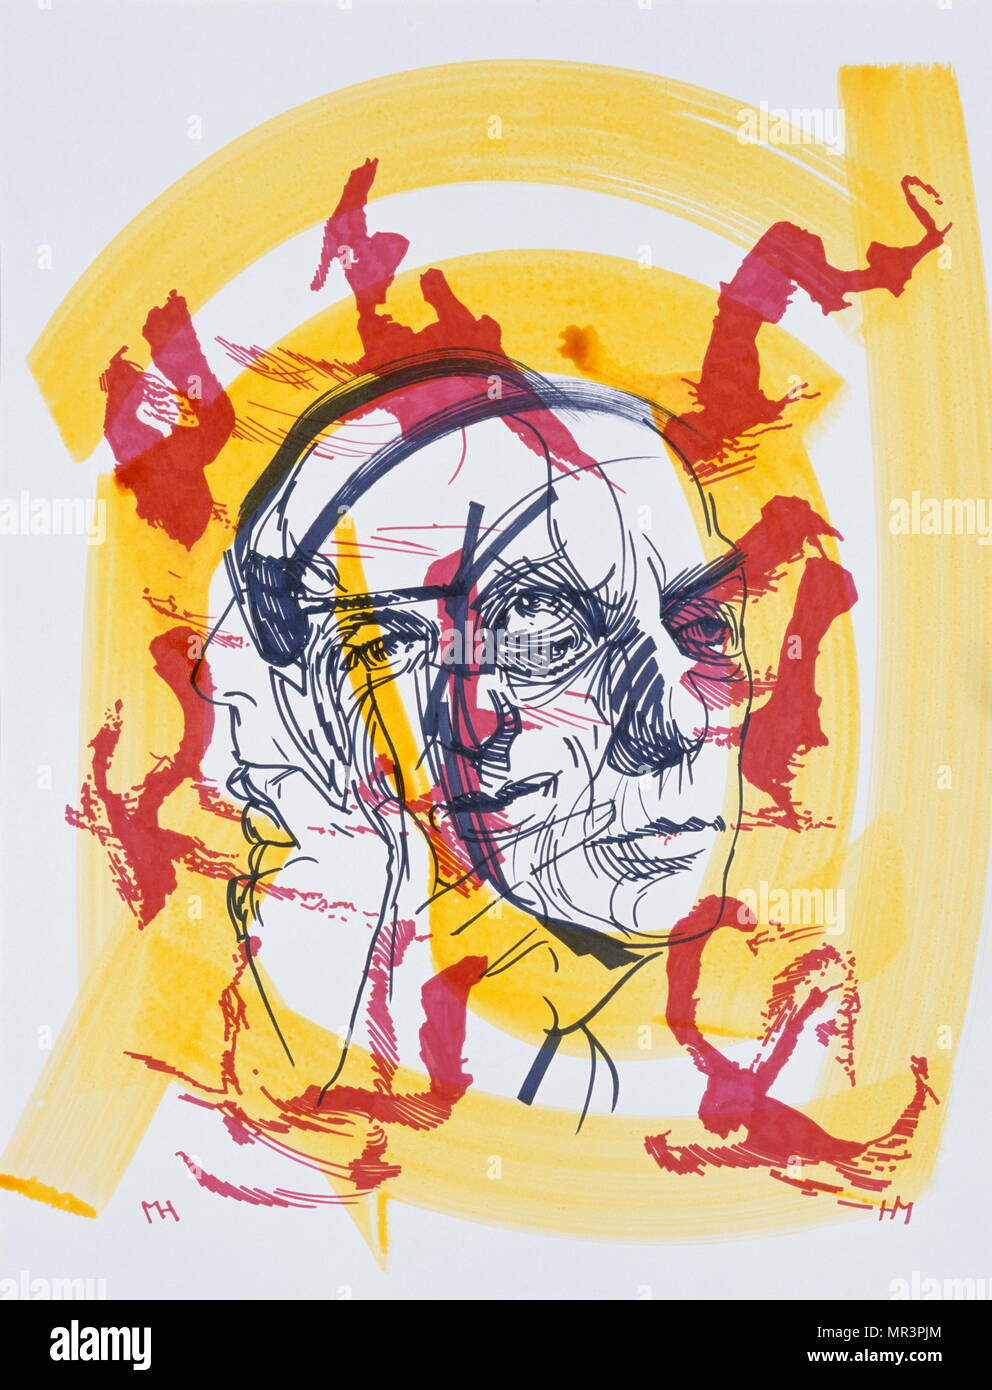 Henri Michaux (1899 – 1984), Belgian-born poet, writer, and painter. 1998 Portrait on a poster by Raymond Moretti (1931-2005), a French painter and sculptor. Stock Photo